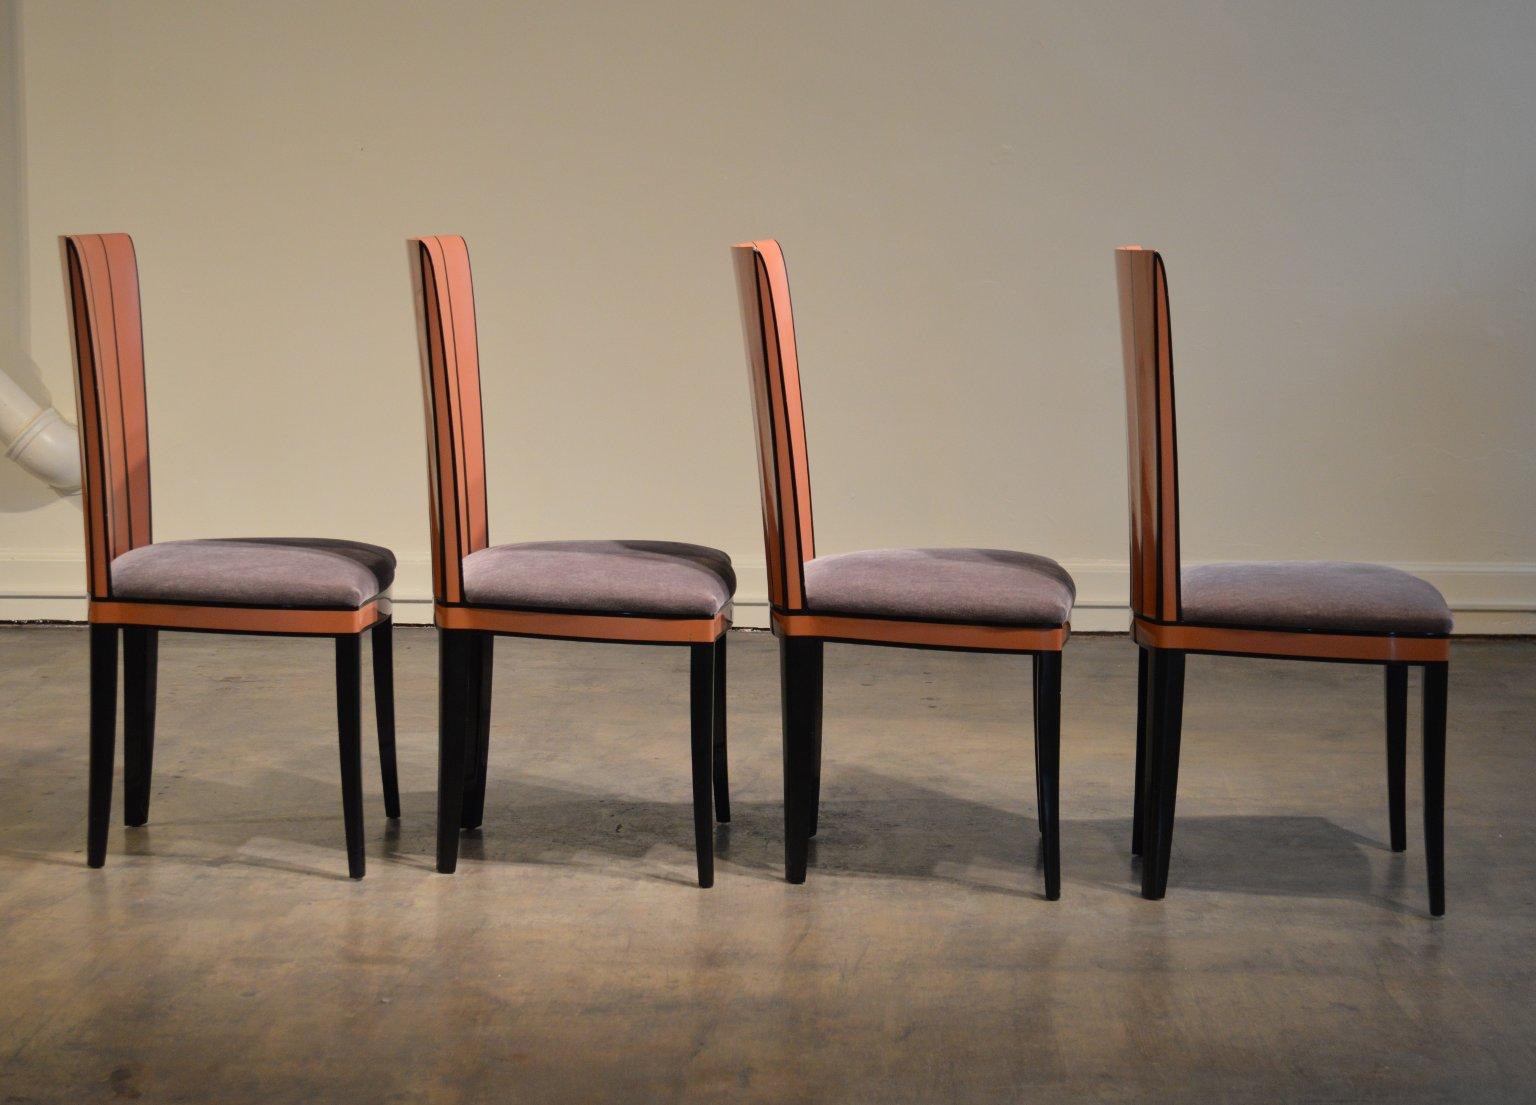 Authorized reproductions of the chairs designed by Eliel Saarinen for his home at Cranbrook Academy of Art, circa 1929. Only 14 originals were reproduced, but authorized reproductions have been made by various manufacturers since the 1970s.

These